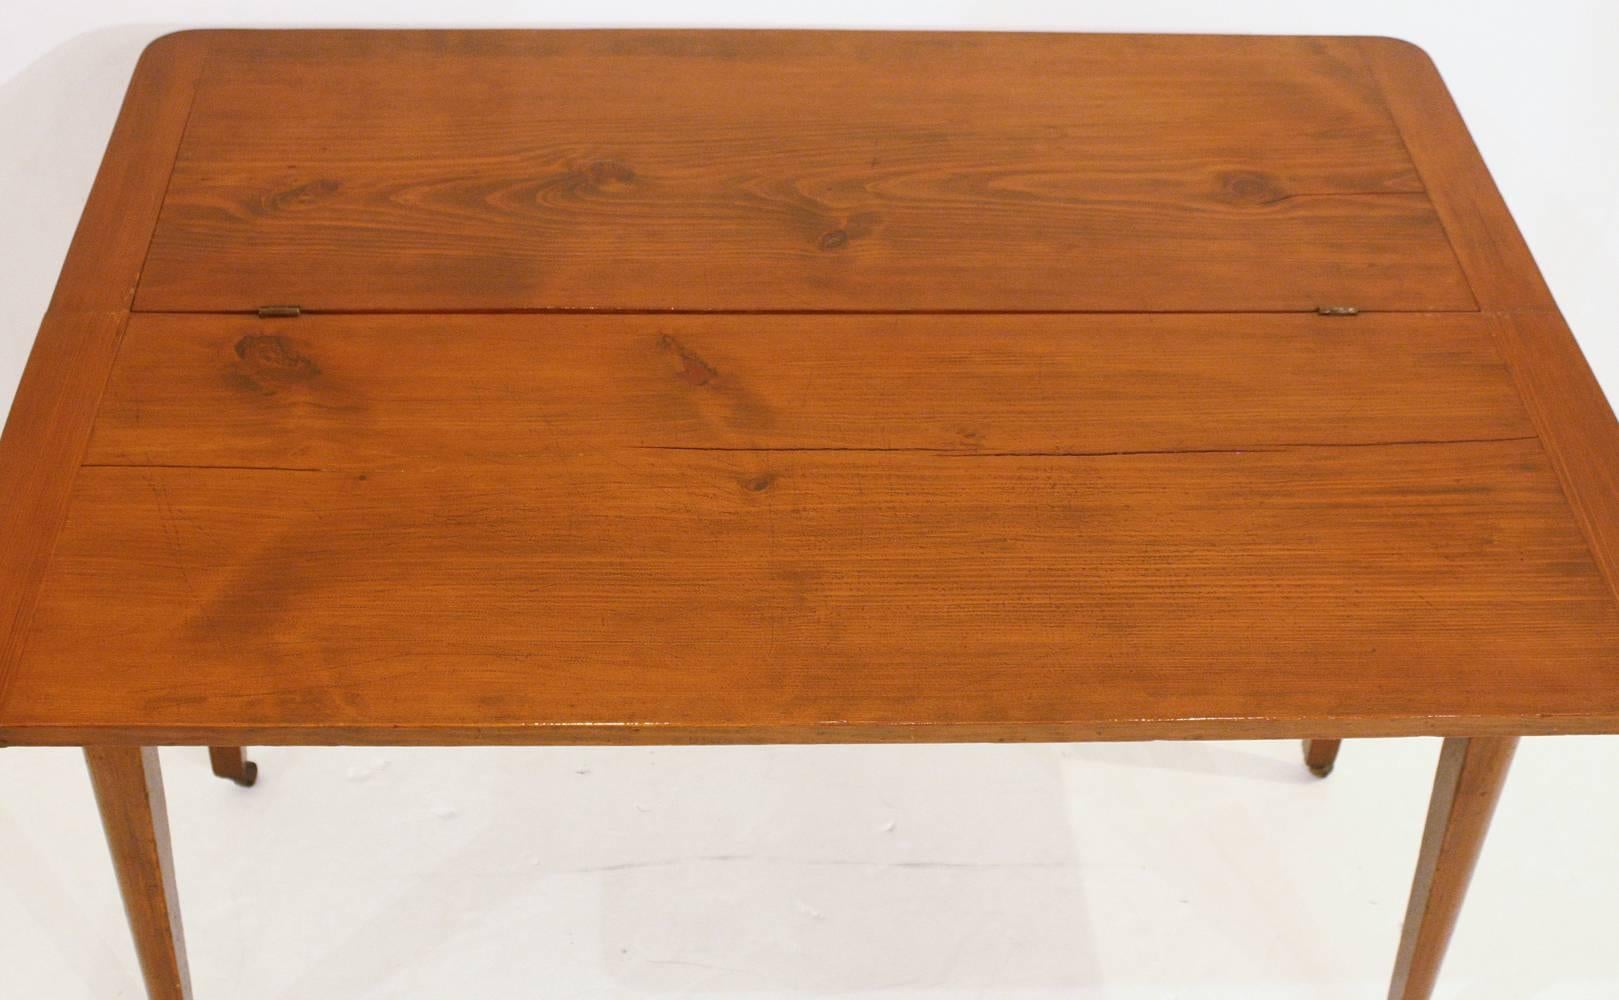 19th Century Small Pine Sideboard / Table, American Probably Texas